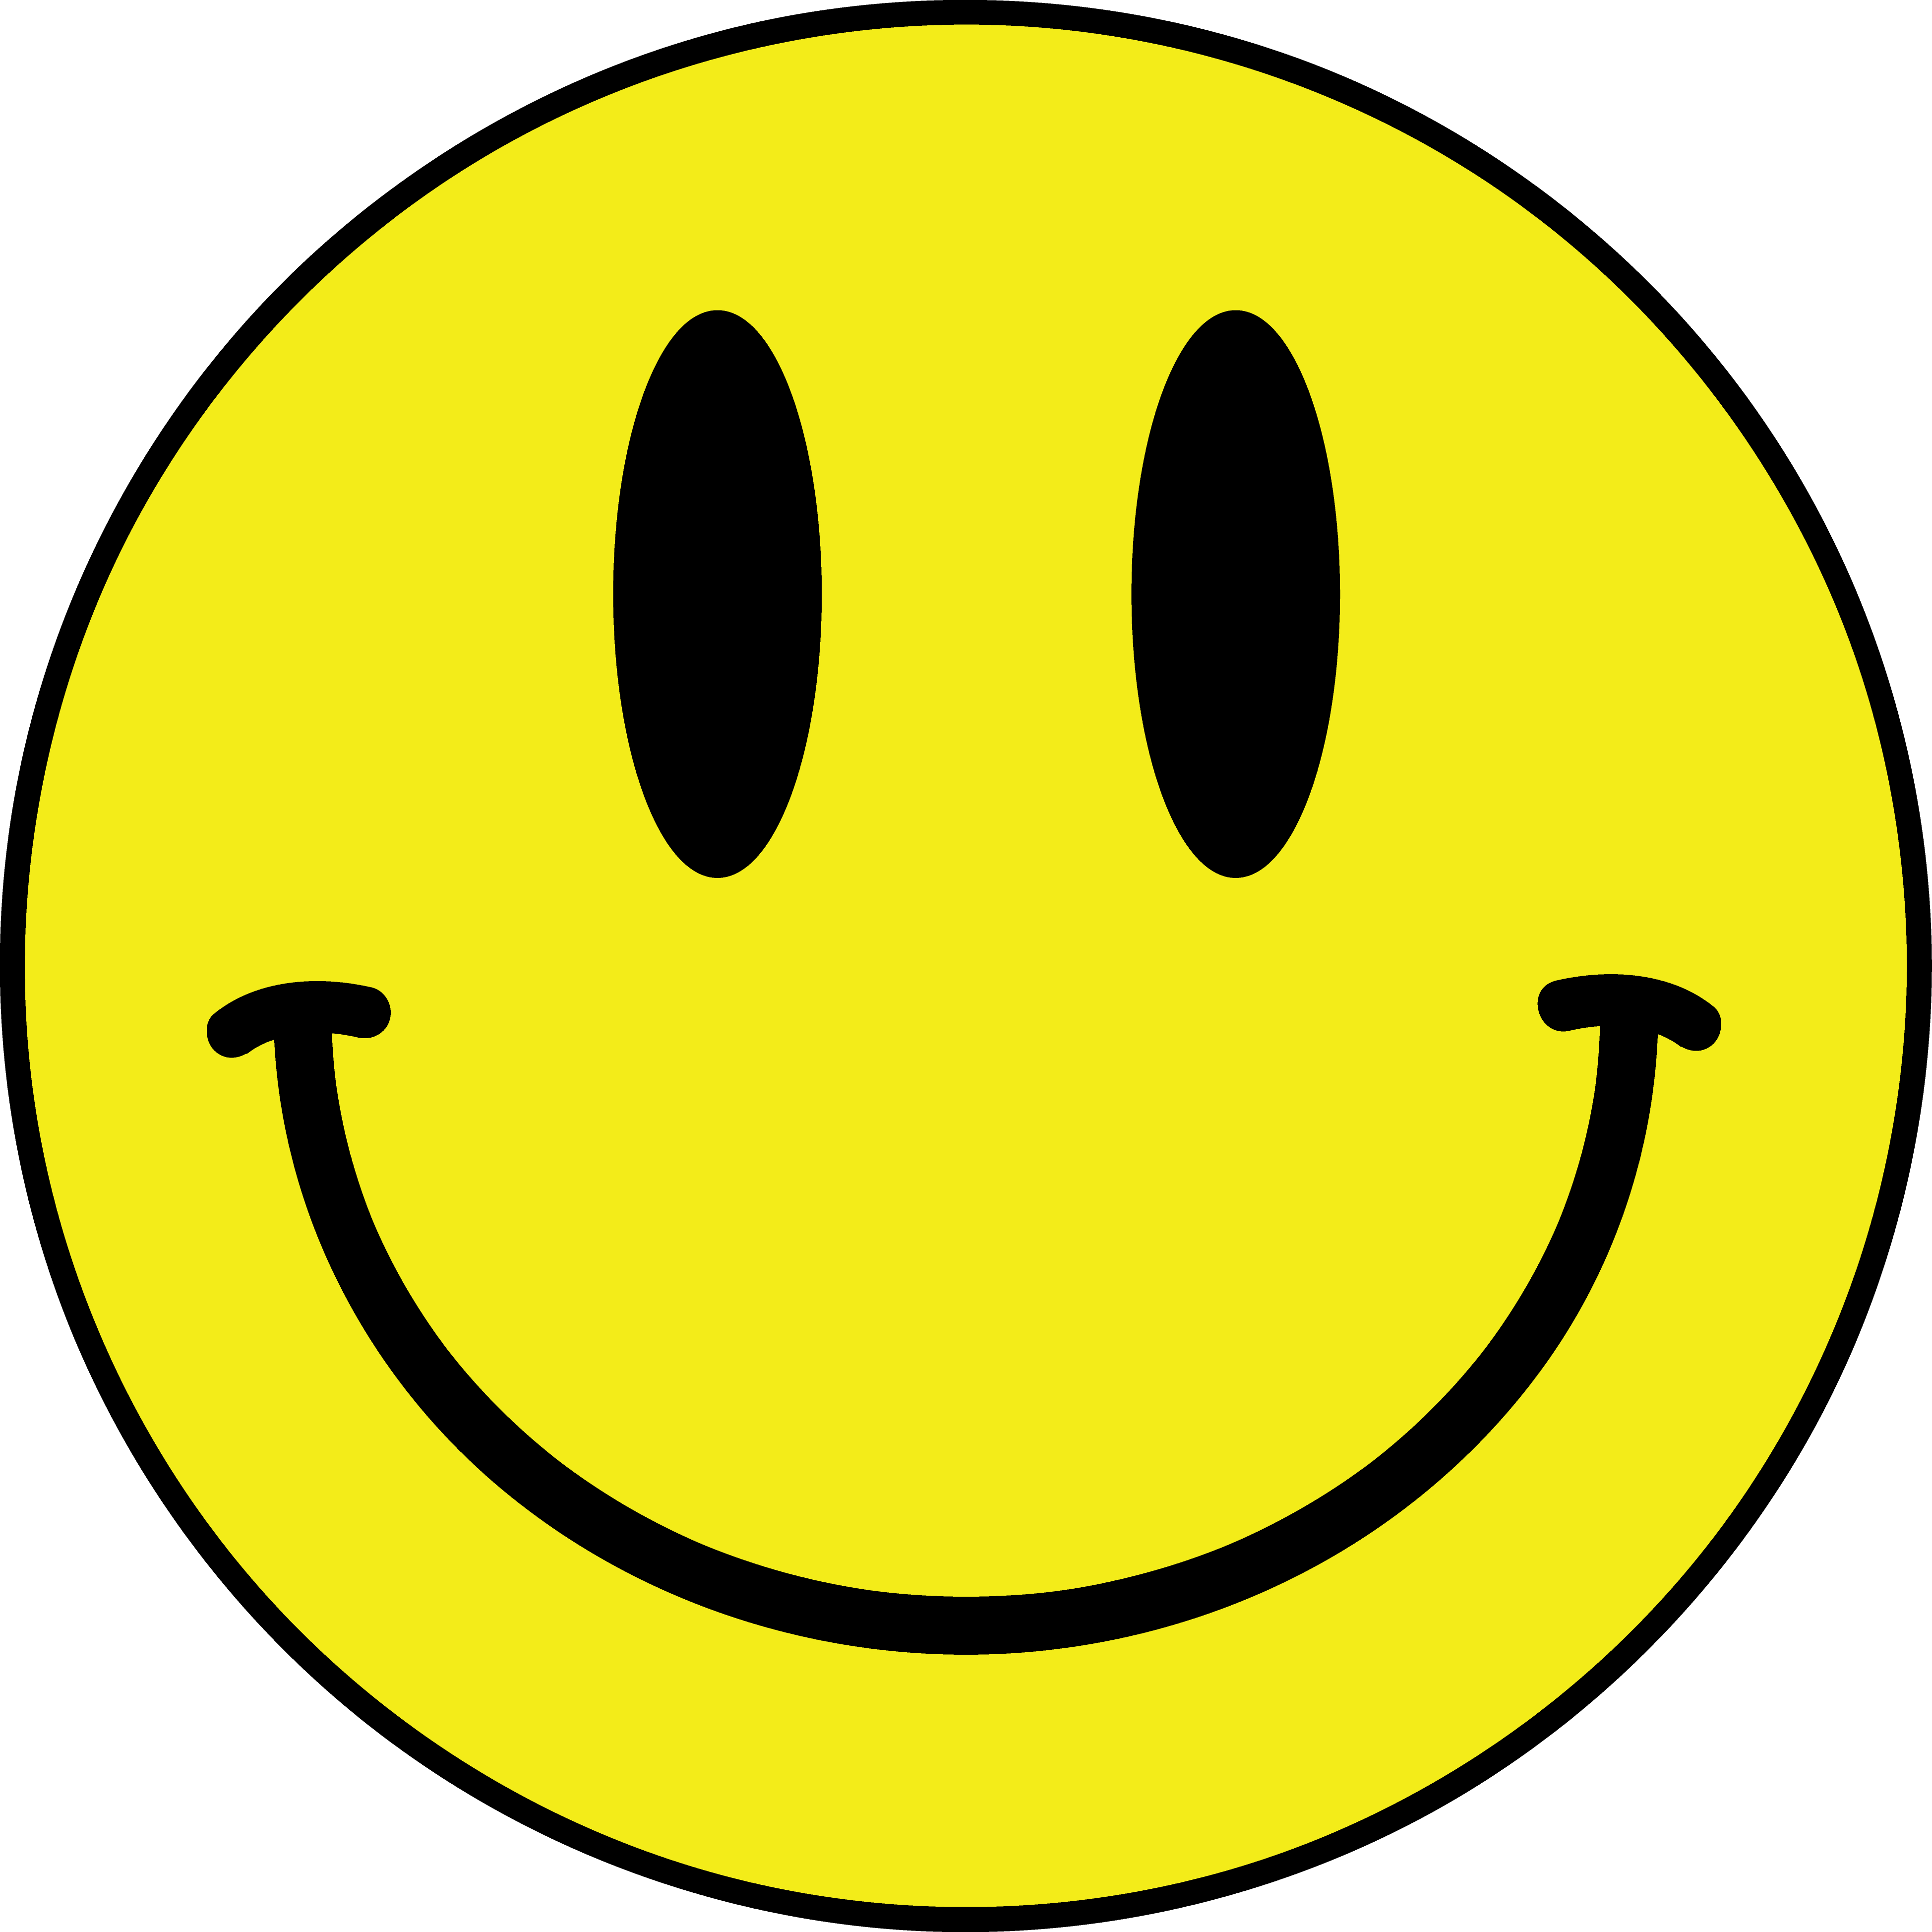 Smiley Looking Happy PNG Image - PurePNG | Free transparent CC0 PNG